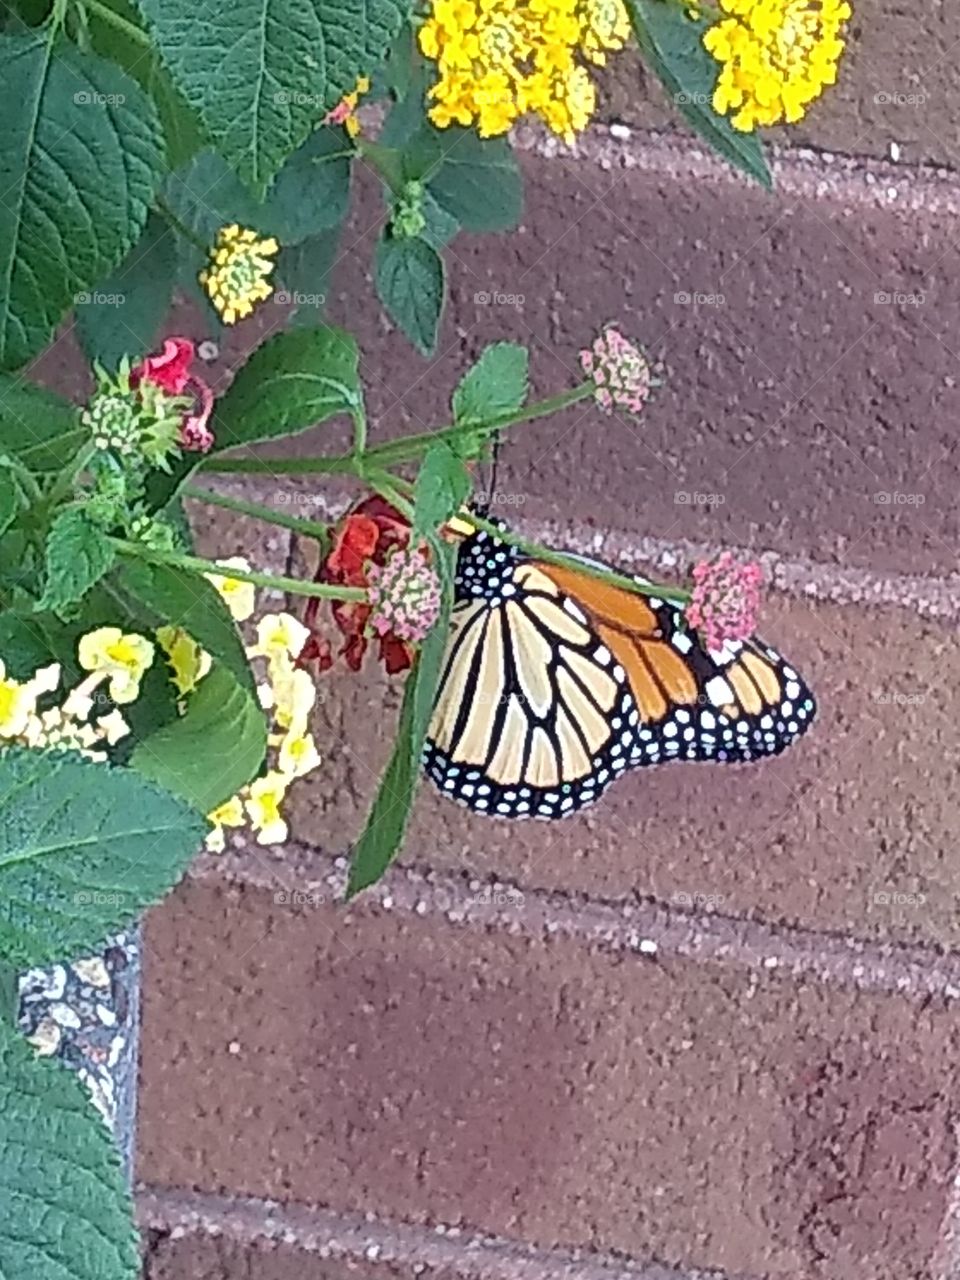 monarch butterfly in action.